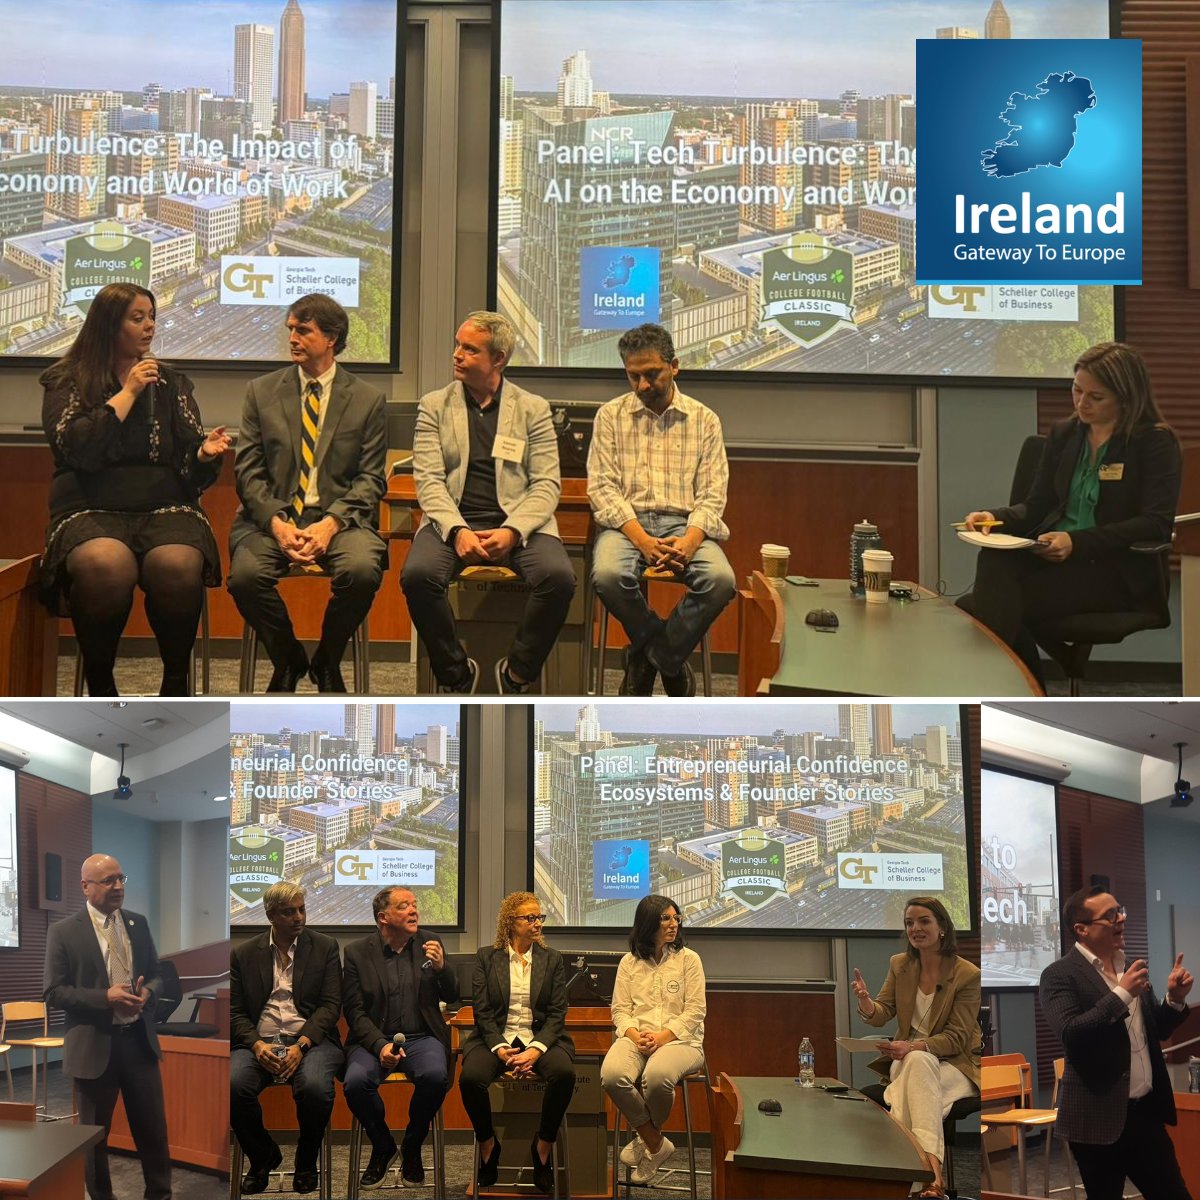 Day 2 in #Atlanta: Such interesting and engaging panel discussions hosted in @GeorgiaTech. Our panels discusses The Impact of AI on the Economy and World of Work and Entrepreneurial Confidence, Ecosystems, and Founder Stories #whyireland #investinireland #gatewaytoeurope